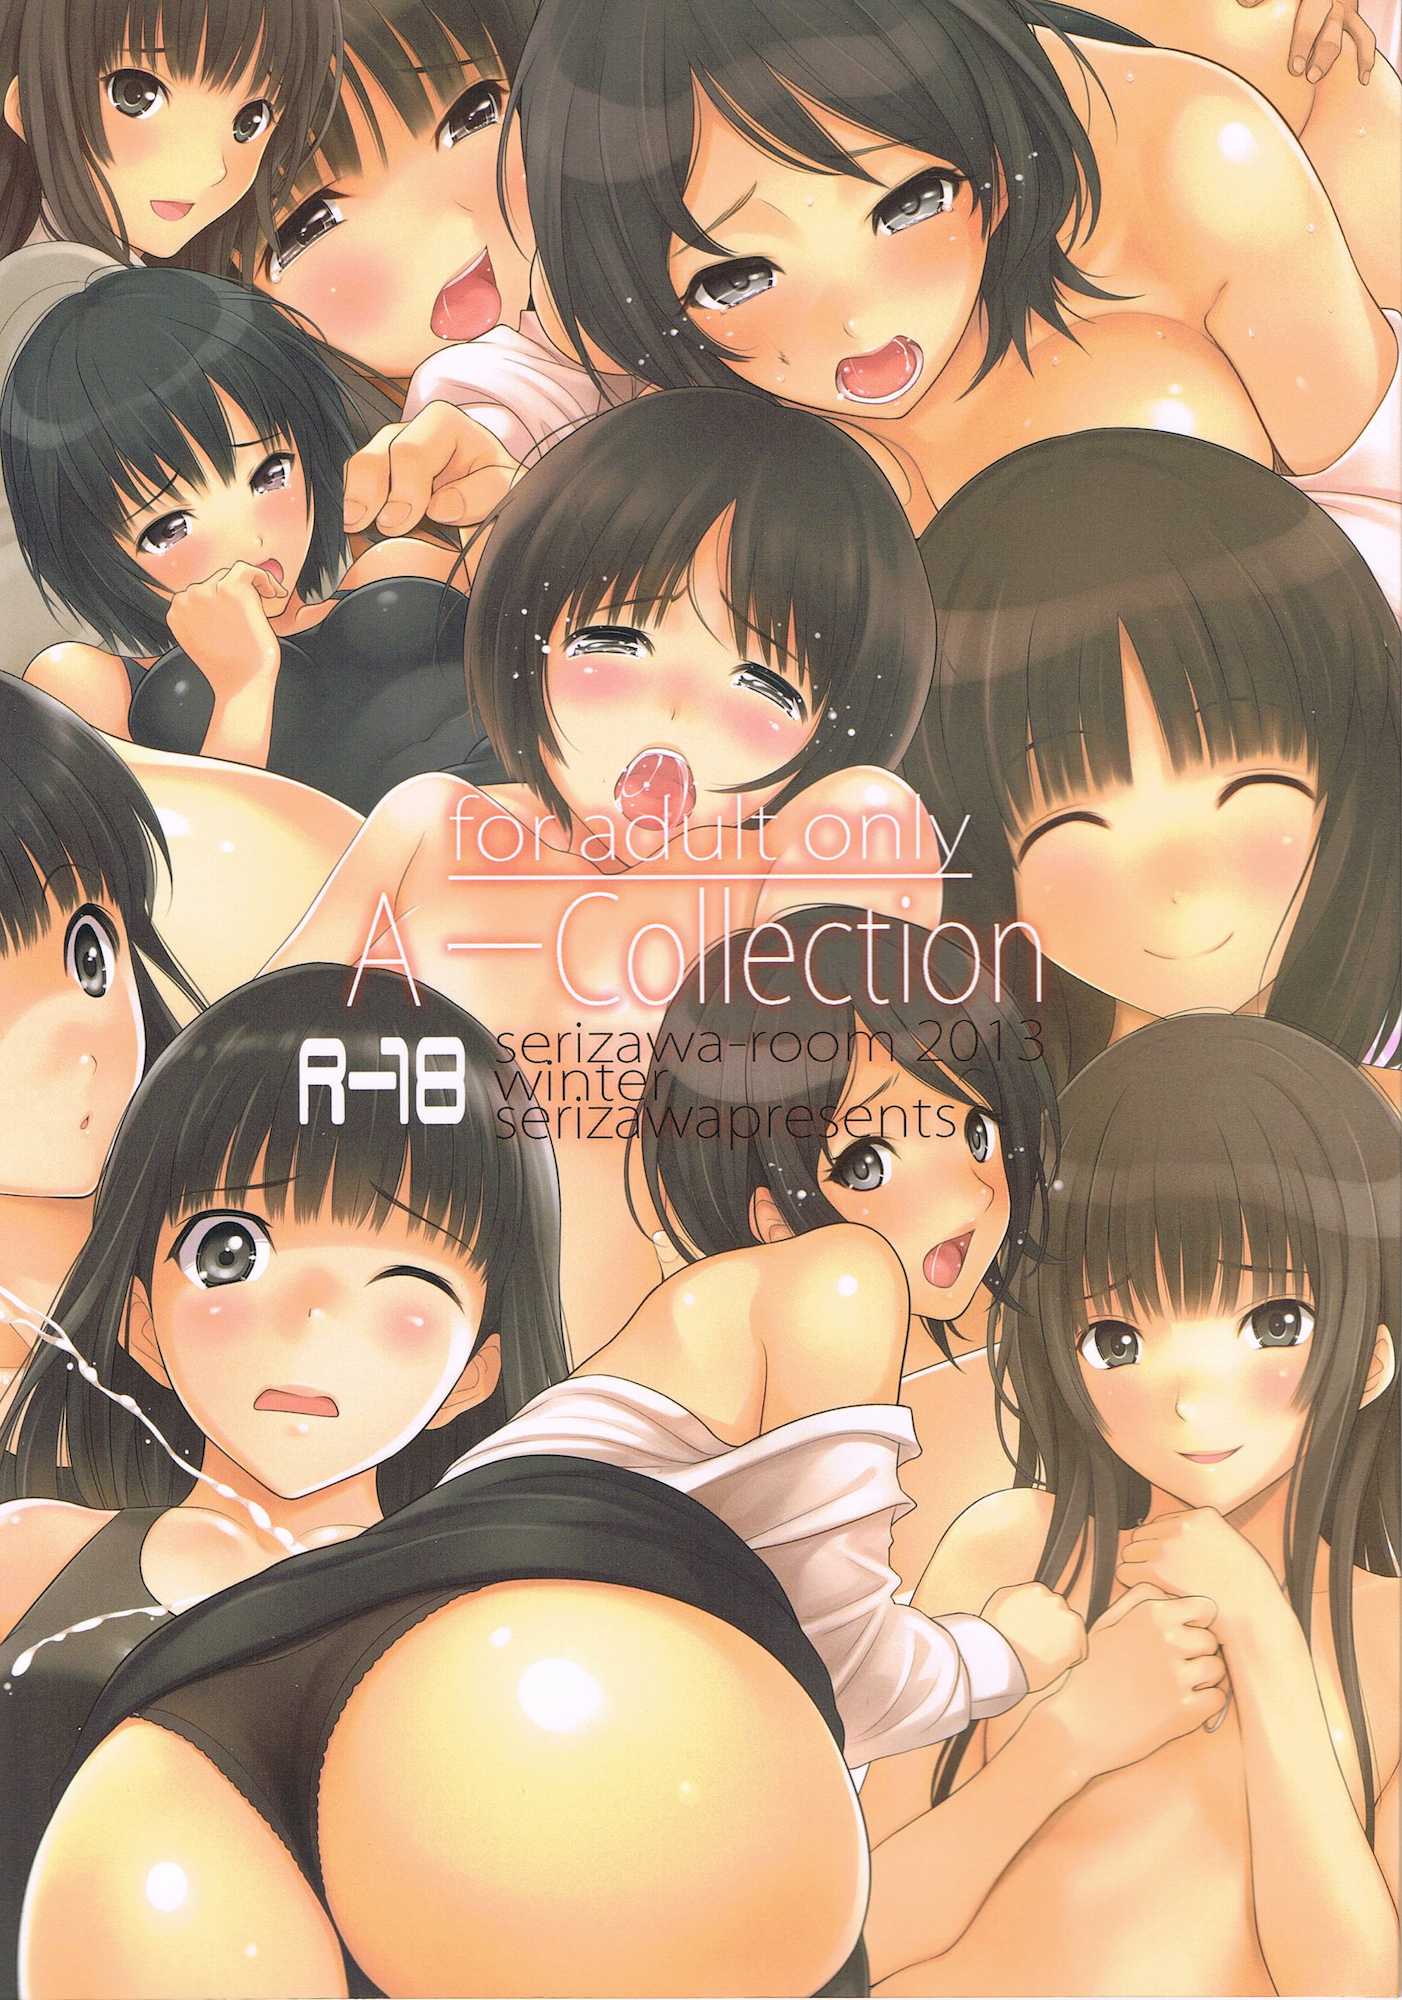 A-Collection 1ページ